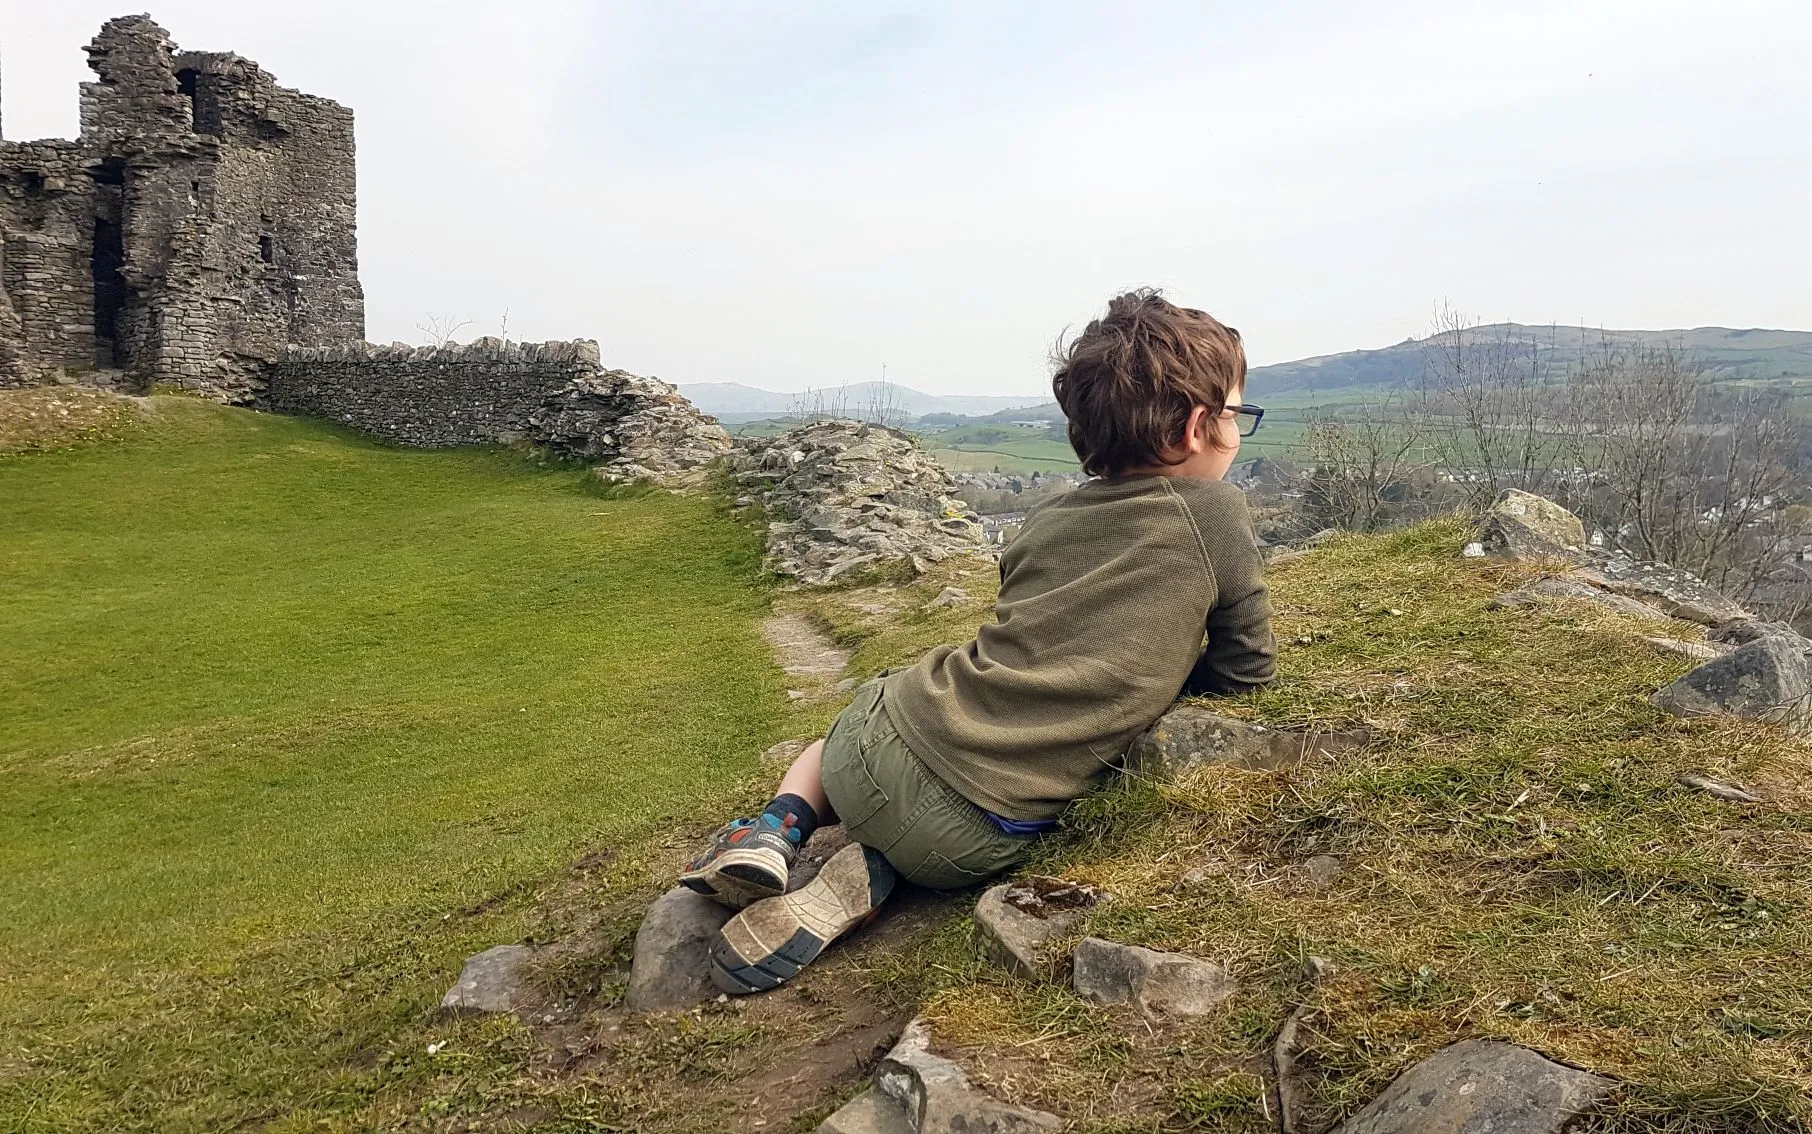 Teddy looking over a castle wall.